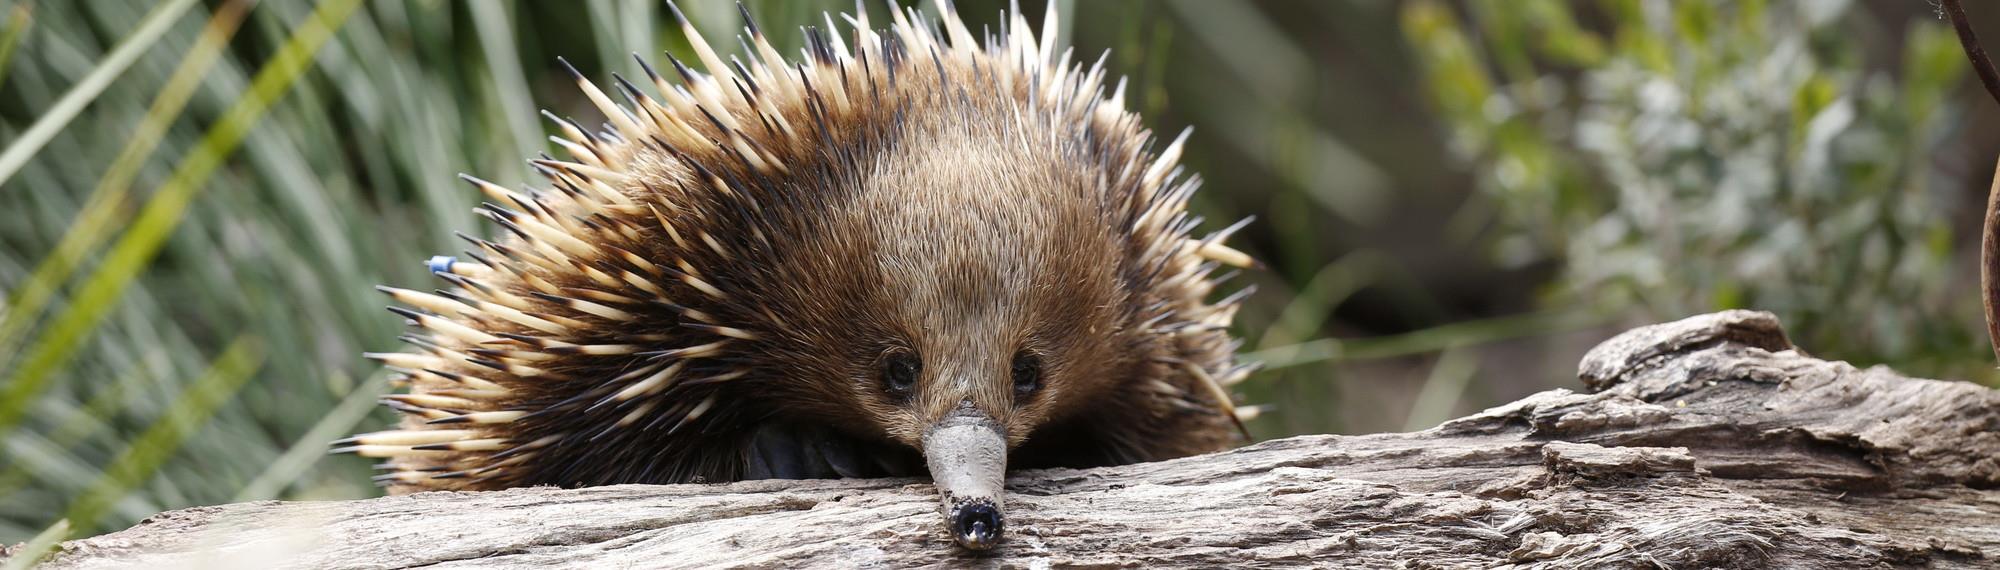 Short Beaked Echidna peaking over a log. Its beak is resting on the log and its looking towards the camera. Its brown with creamy colour spikes.